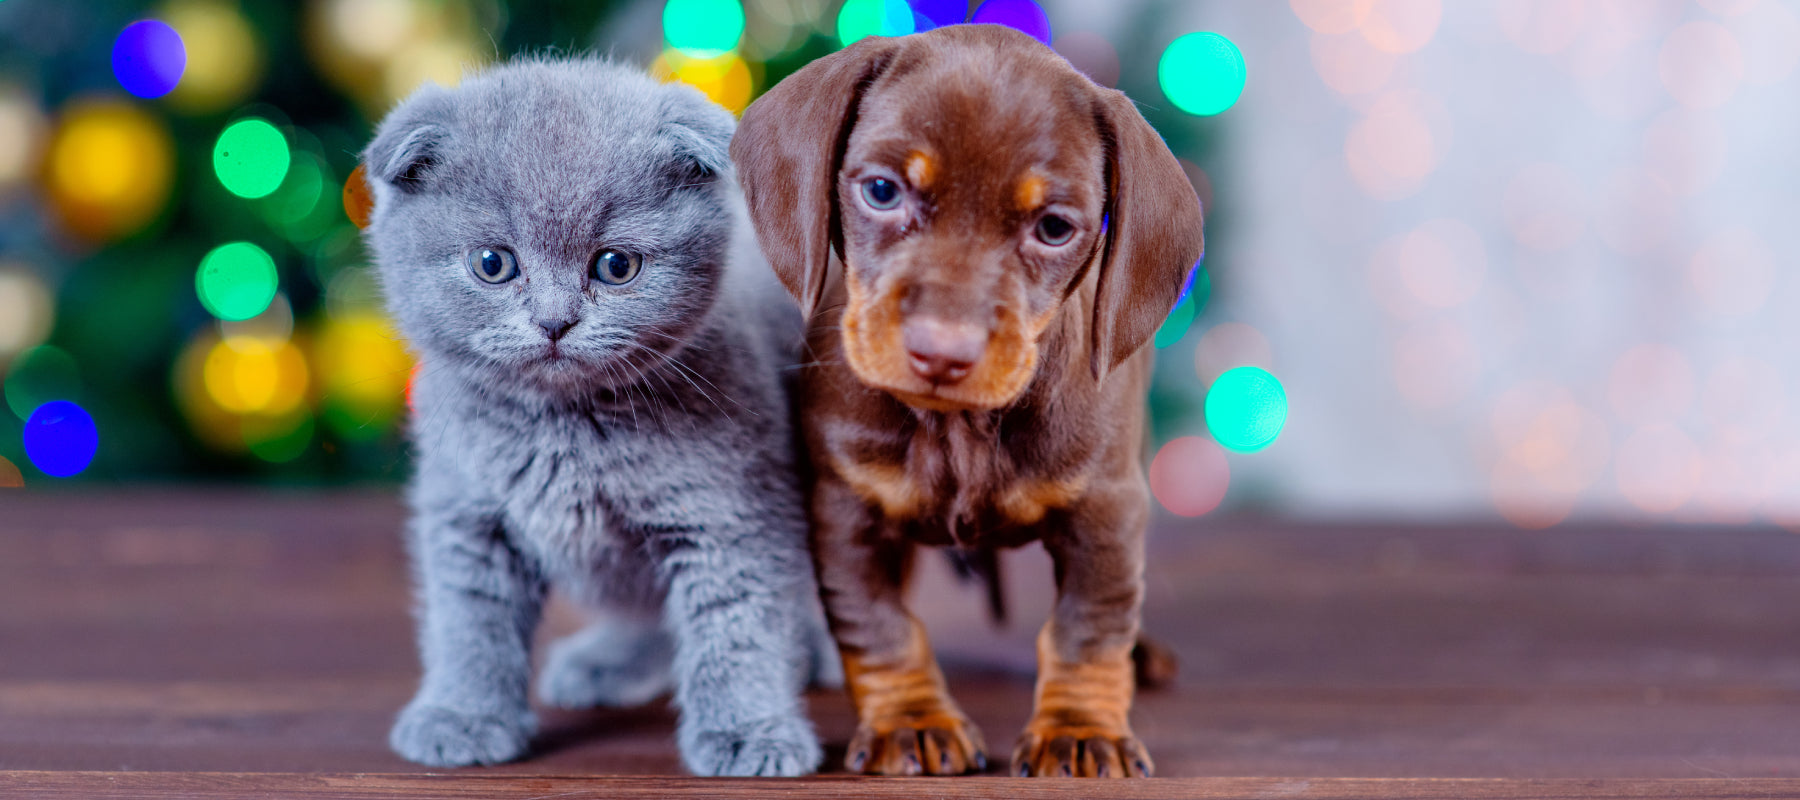 Kitten and Puppy at Christmas